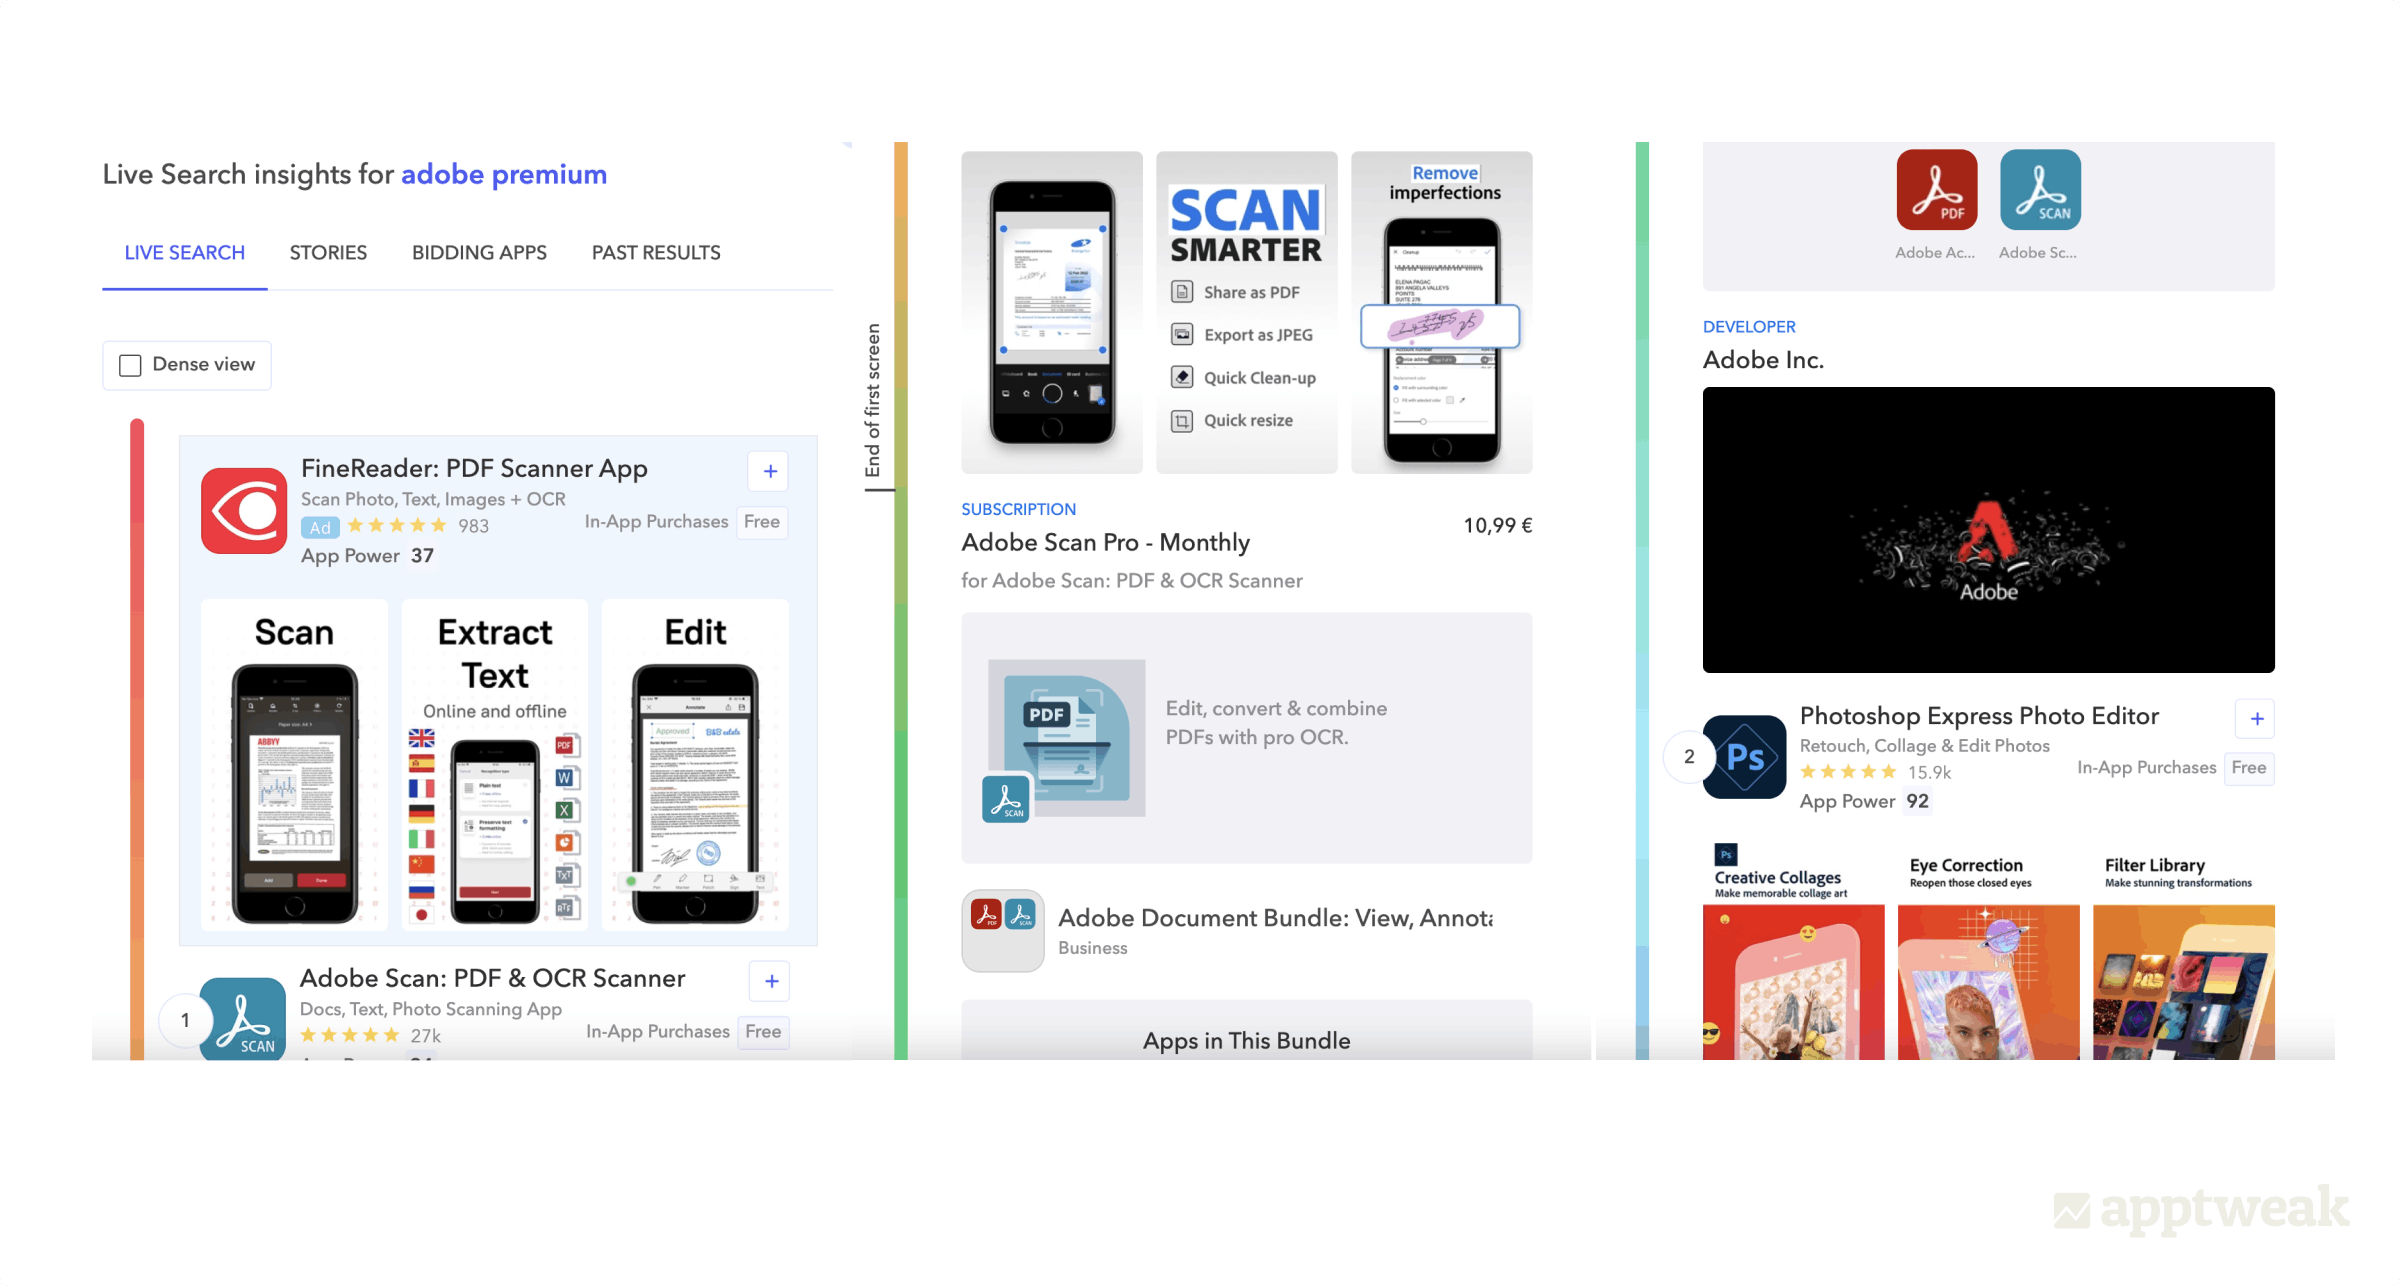 Live Search for “Adobe Premium” on iOS16 - US.